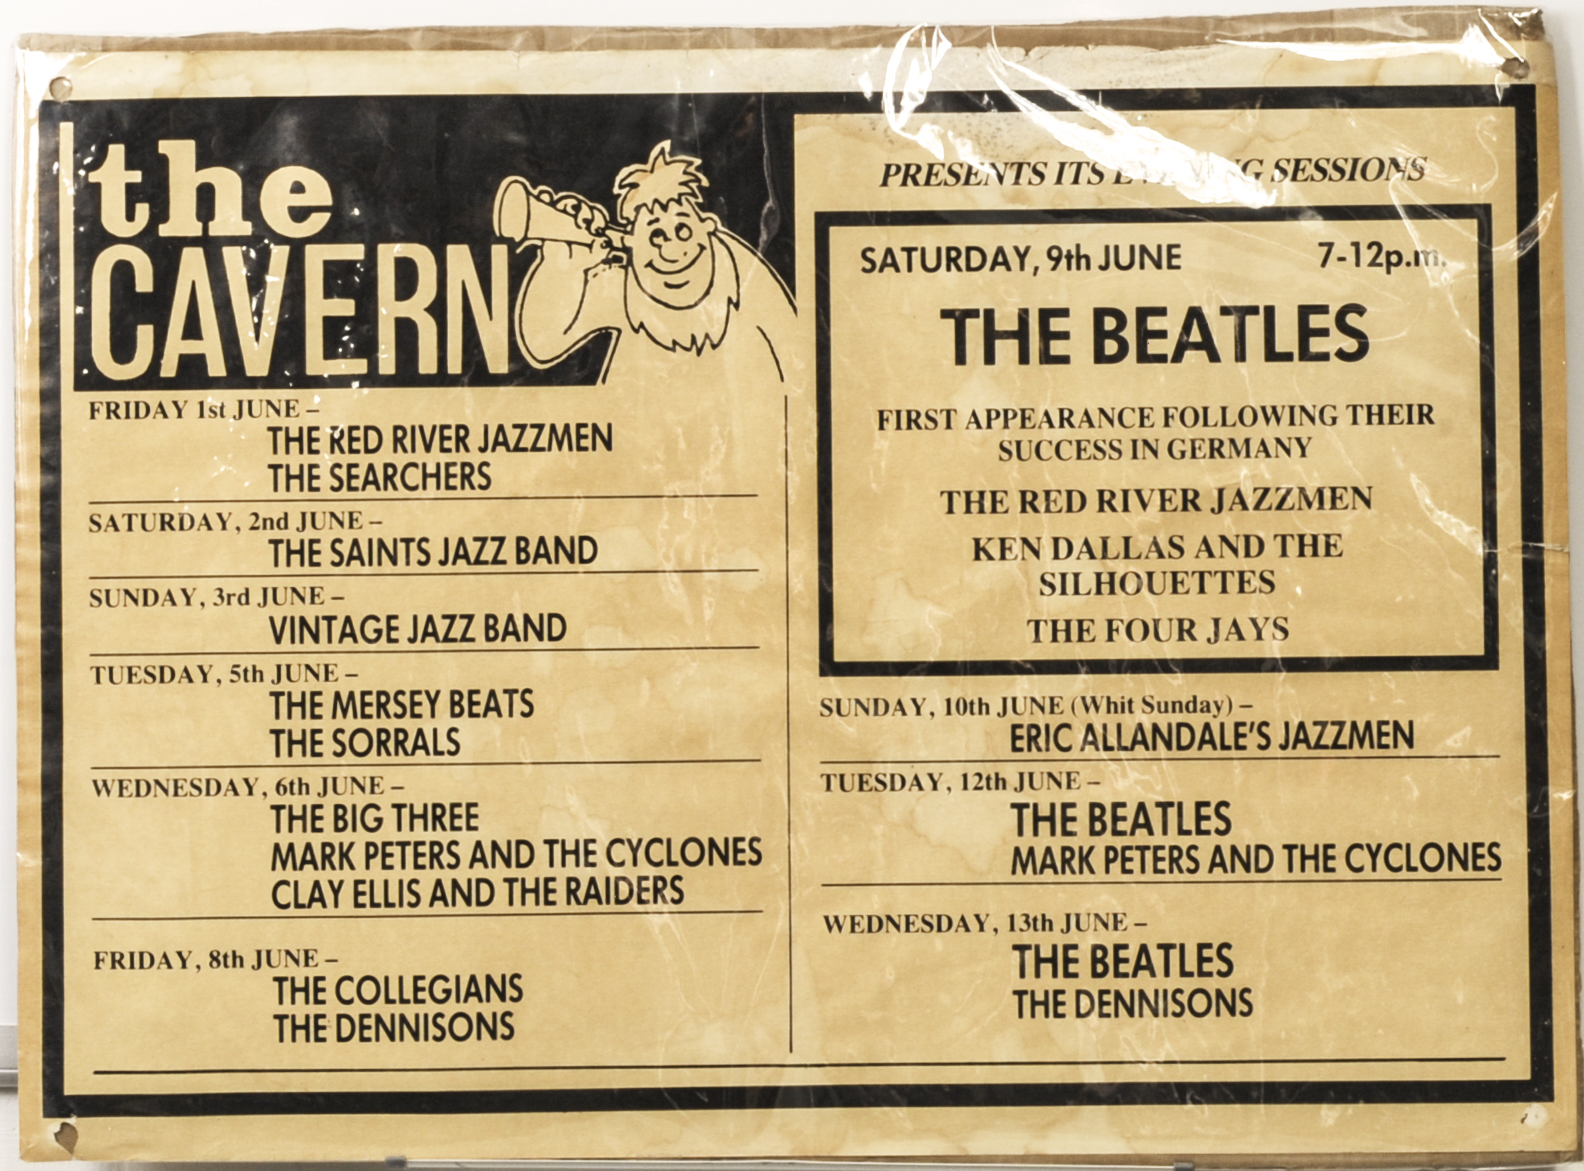 The Beatles / Cavern Club Poster for The Club for dates in June 1962 (believed to be later issue),